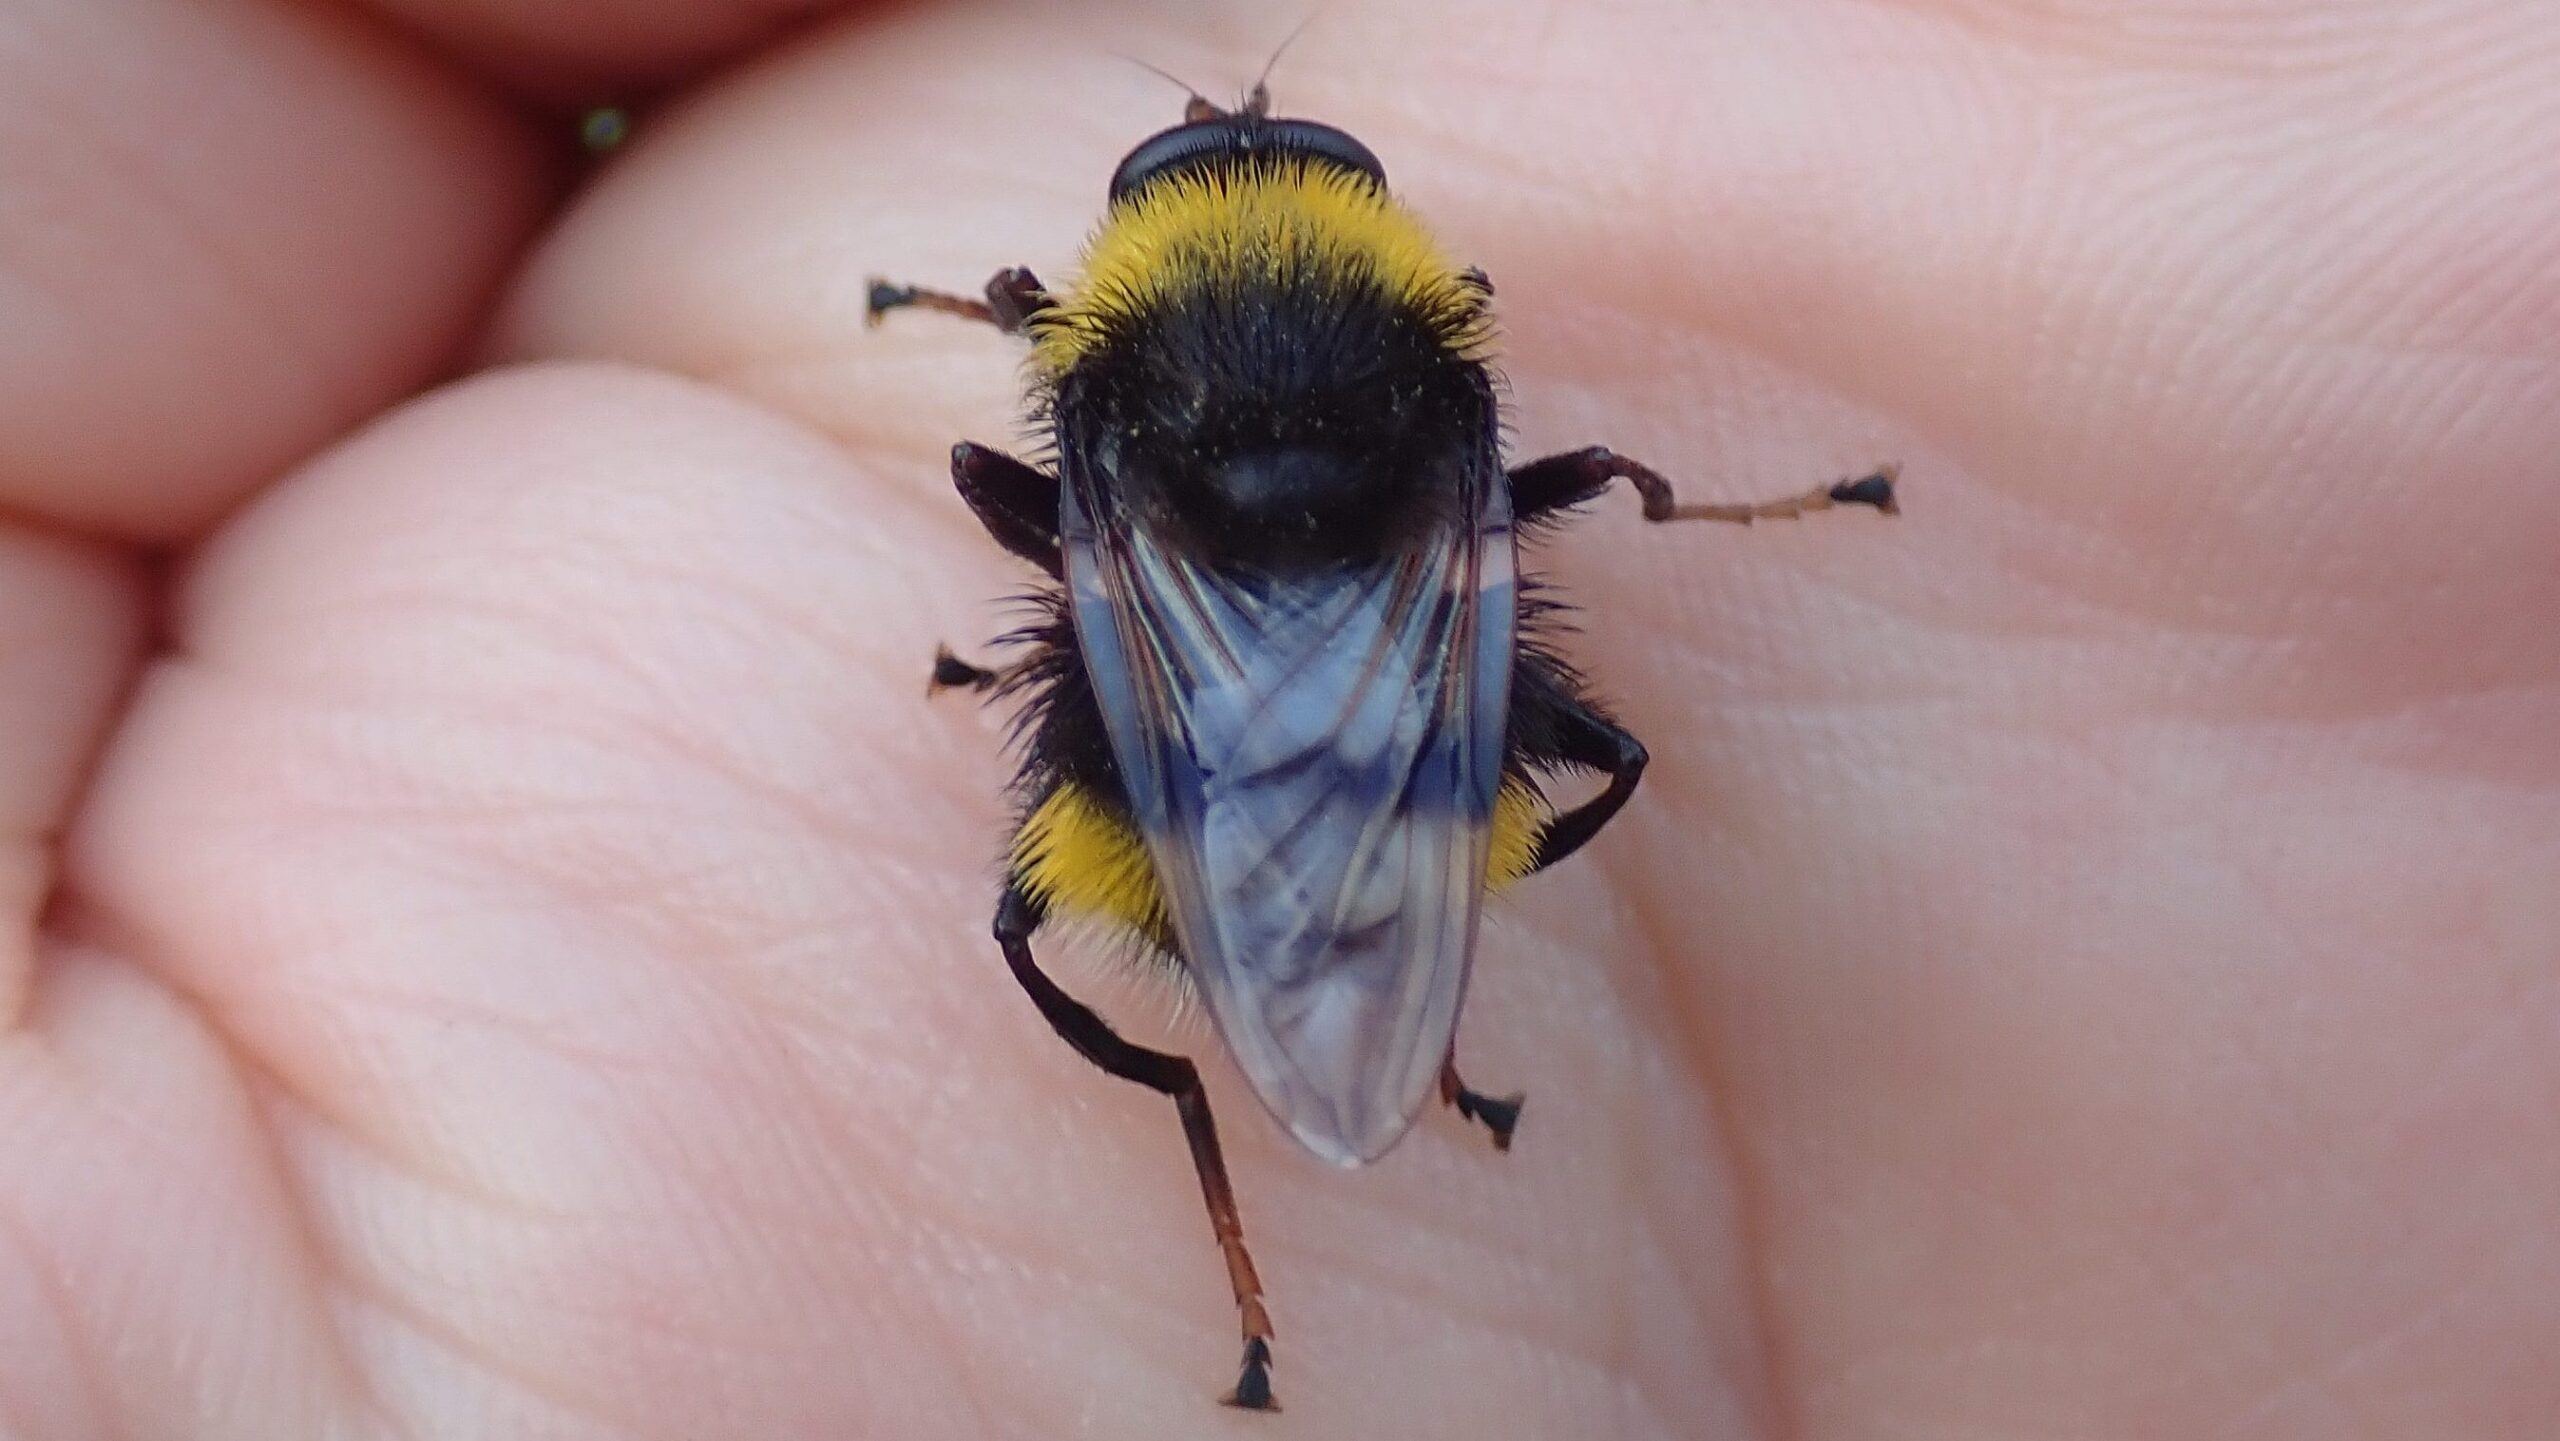 A hoverfly that looks like a bumblebee